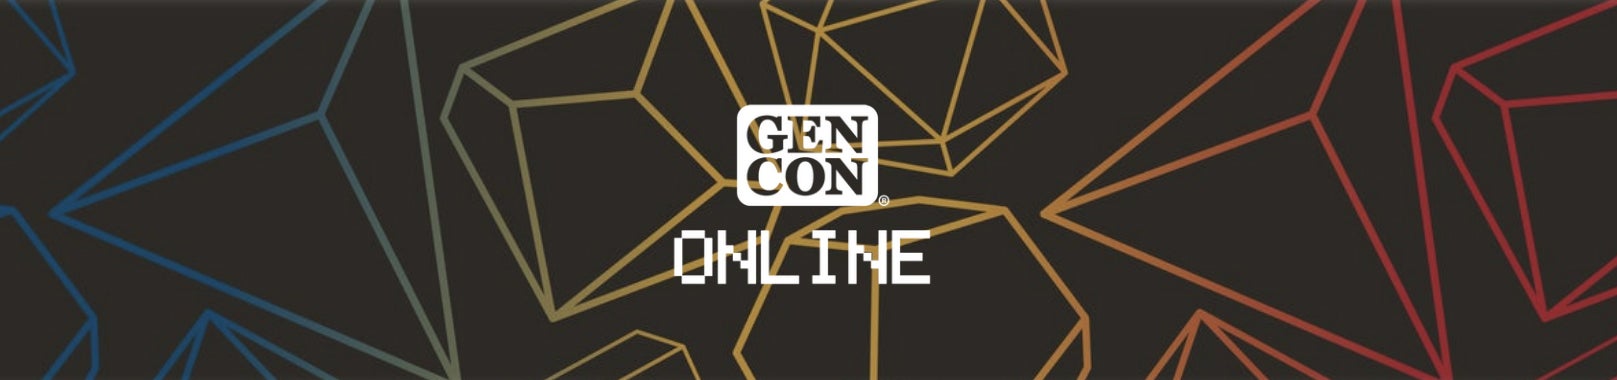 White GenCon Online text logo over a dark background with rainbow outlined dice